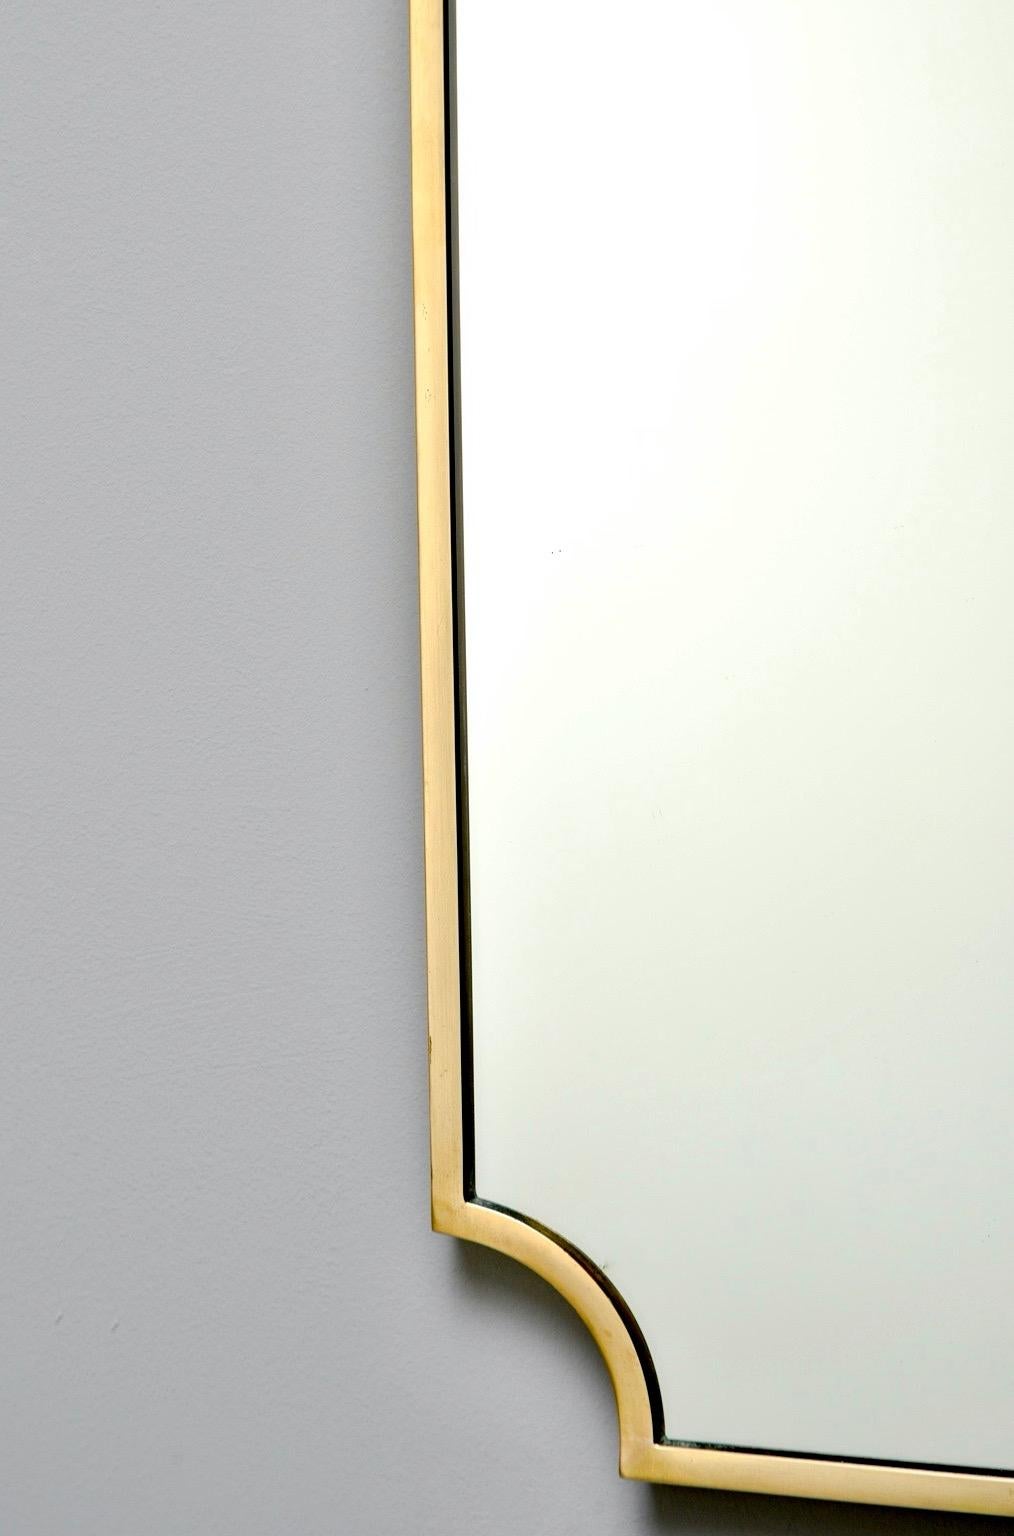 Tall and narrow Italian brass framed mirror, circa 1960. Wood backing. Unknown maker. Very good vintage condition with scattered minor wear to mirror and brass frame. 

Actual mirror size: 34.75” H x 15” W.